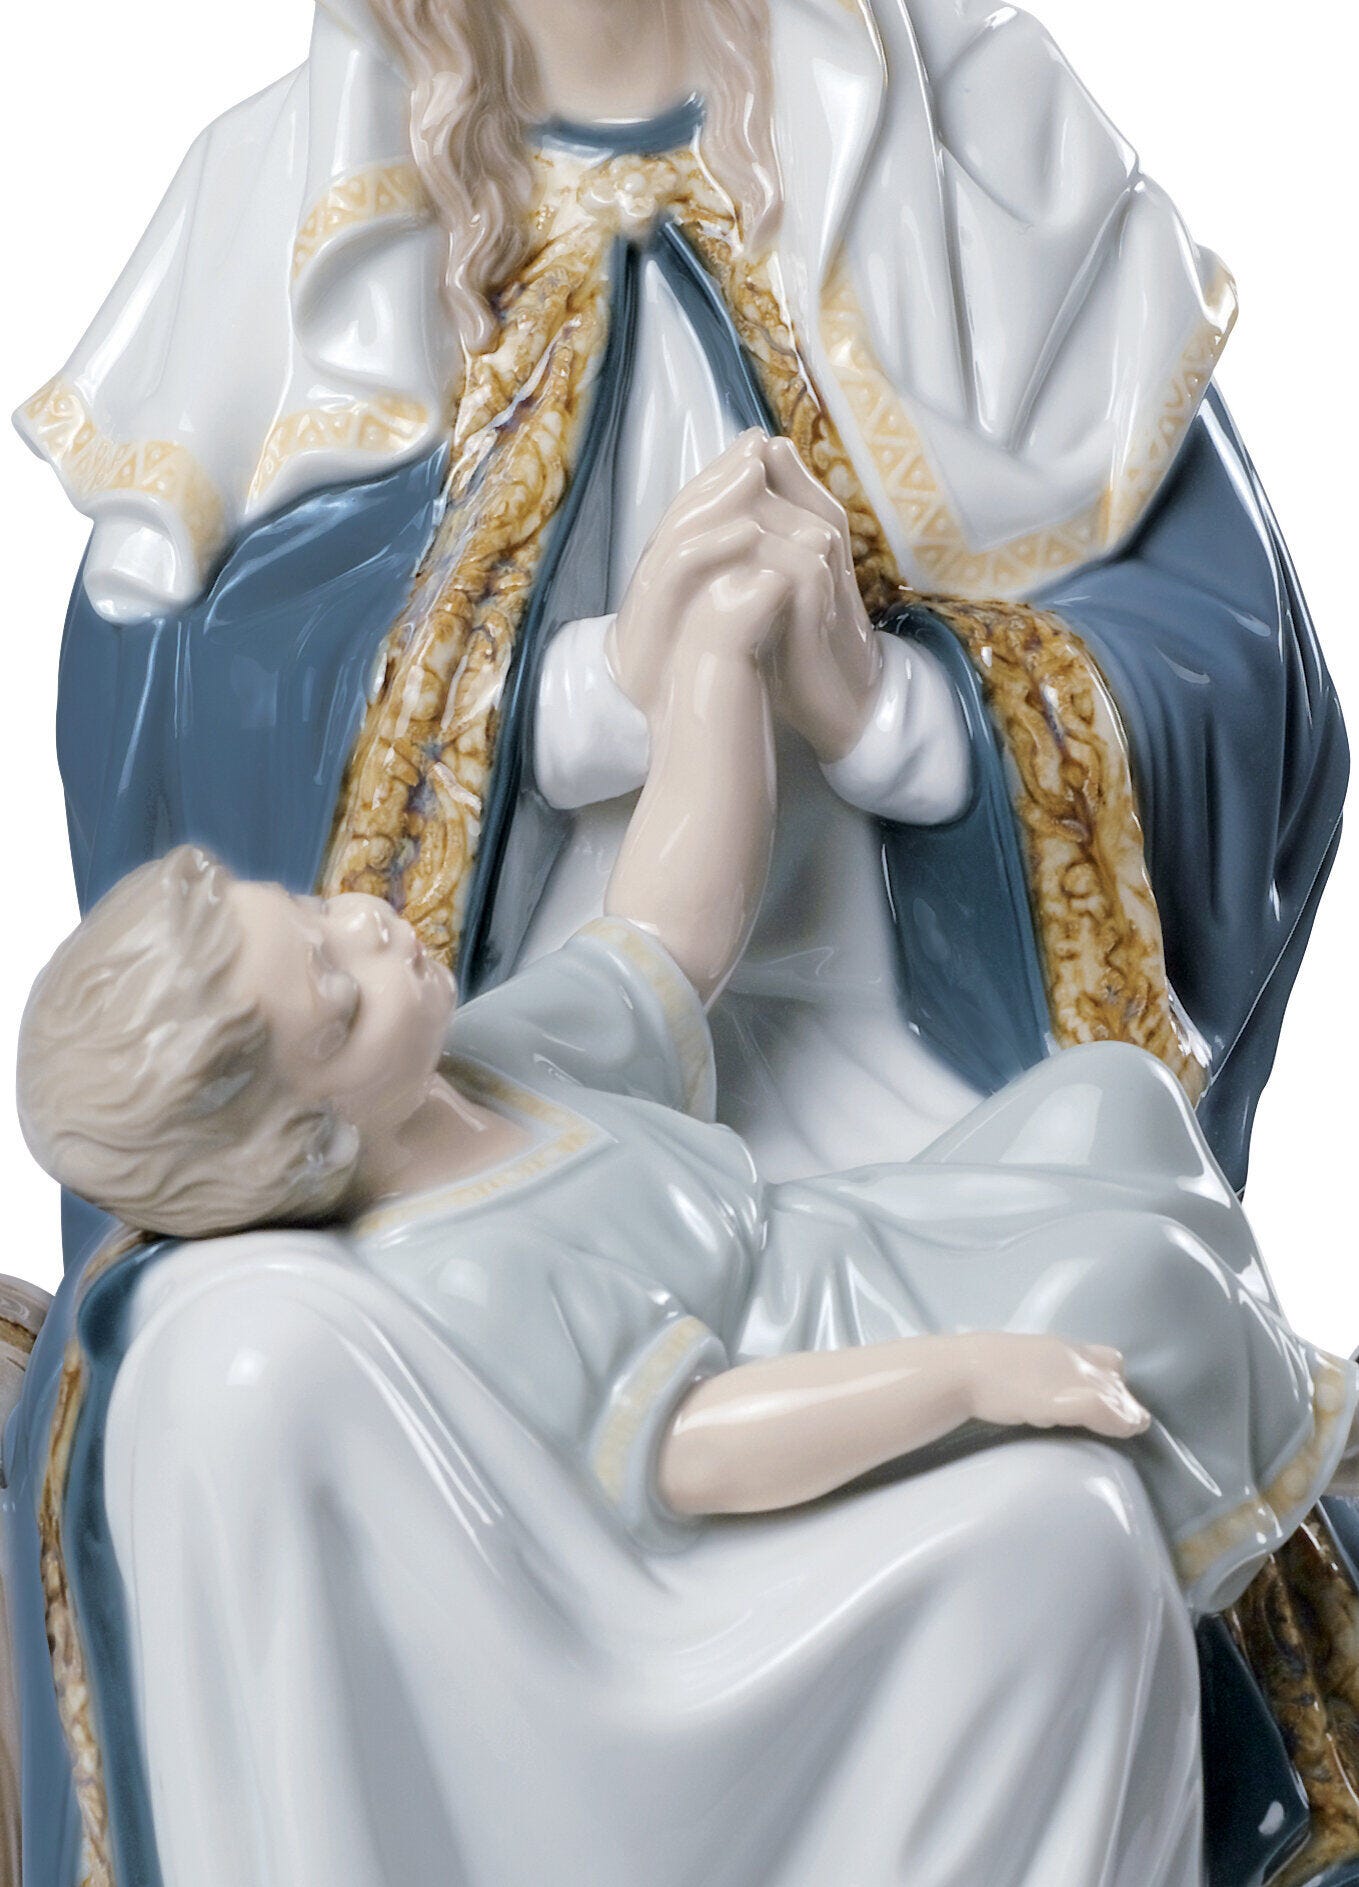 Our Lady of Divine Providence Figurine